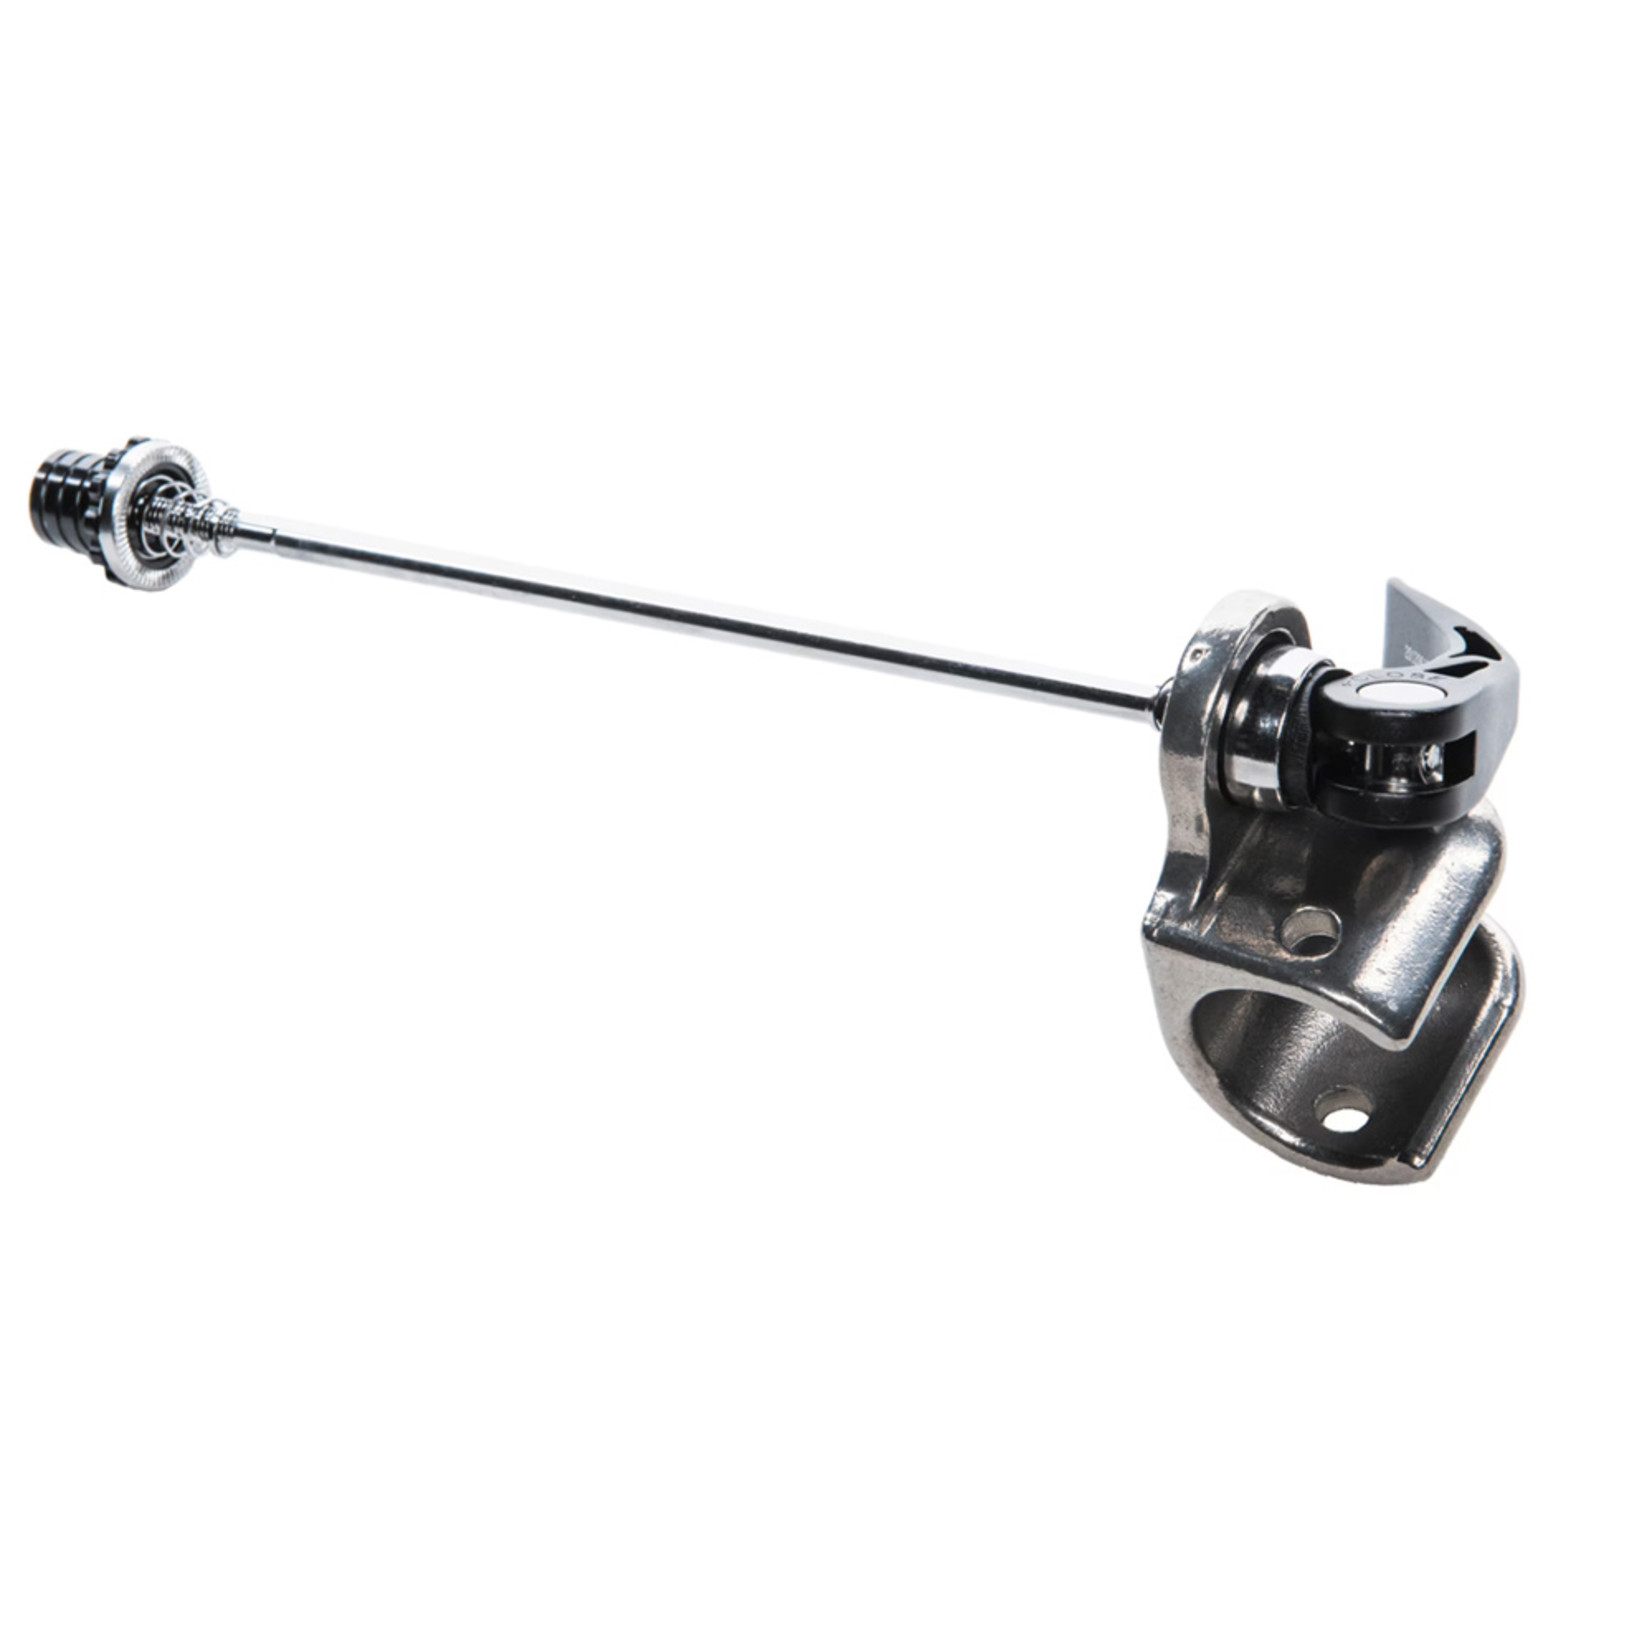 Thule Thule Axle Mount ezHitch Cup with Quick Release Skewer 20100796 - Black